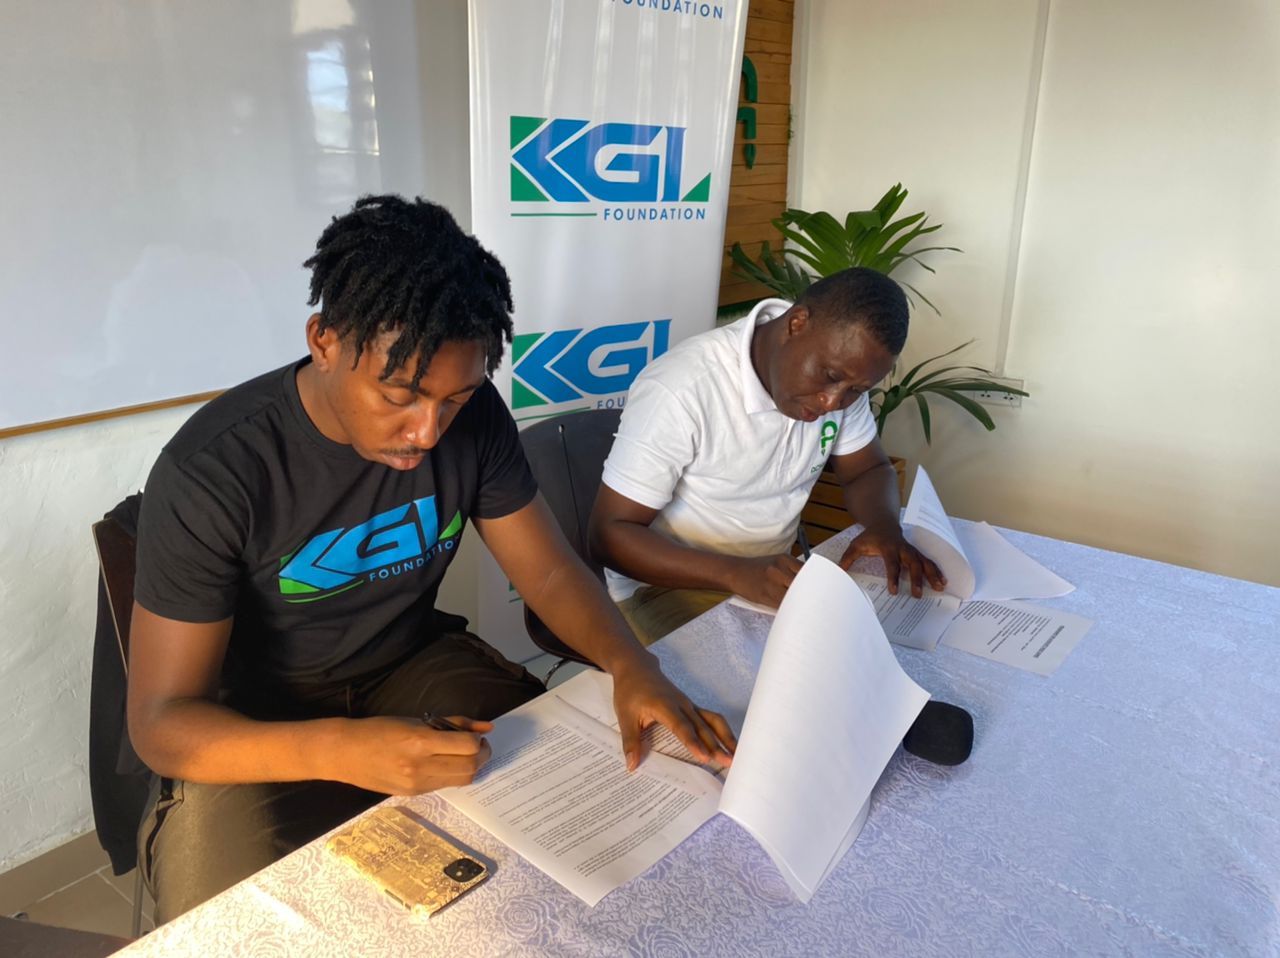 KGL Foundation Launches Partnership With Achievers Ghana